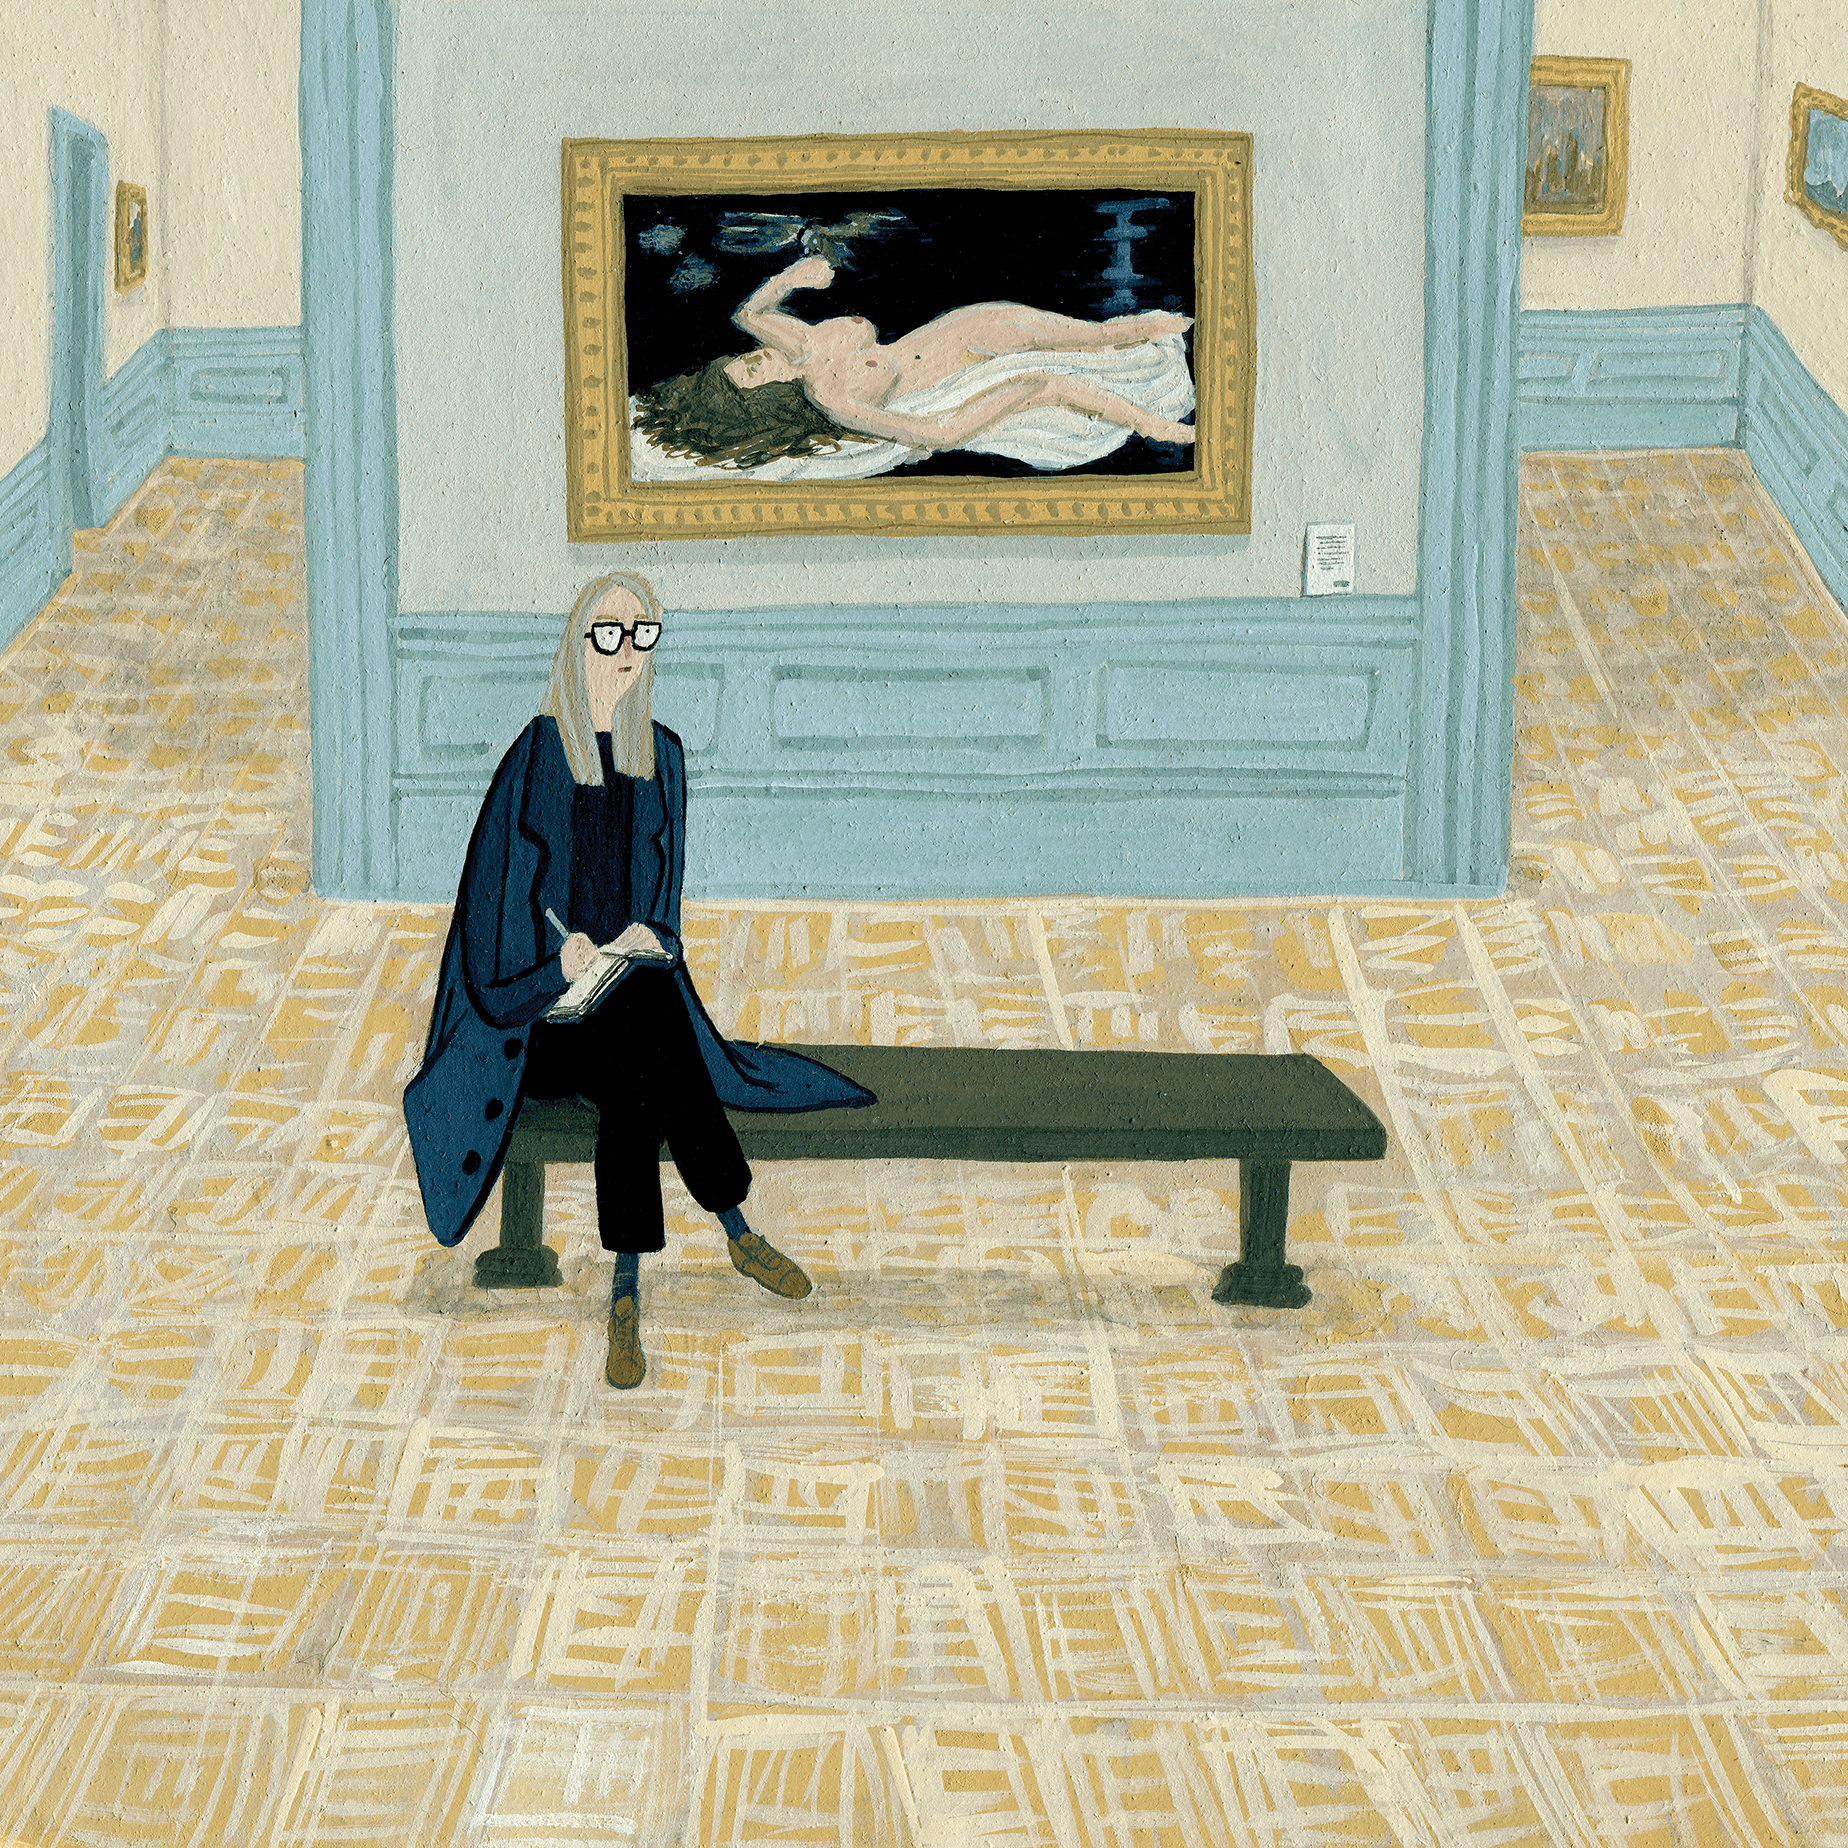 painting of a woman sitting on a bench in a museum.